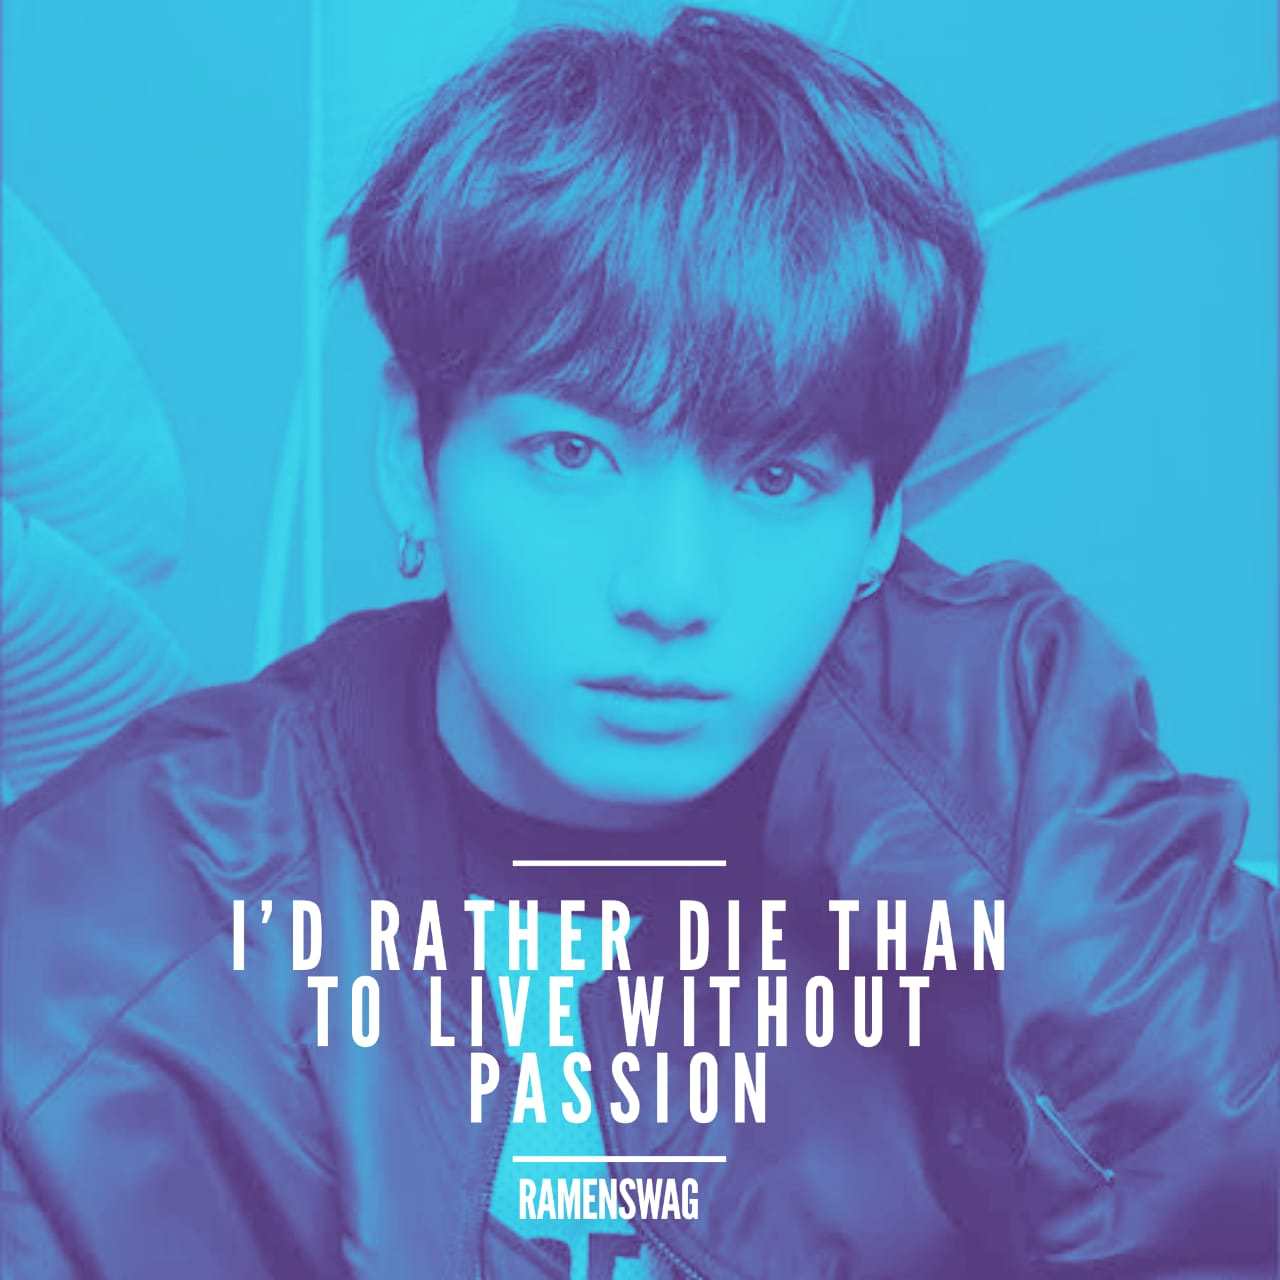 Motivational Bts Quotes Jungkook Quotes Free